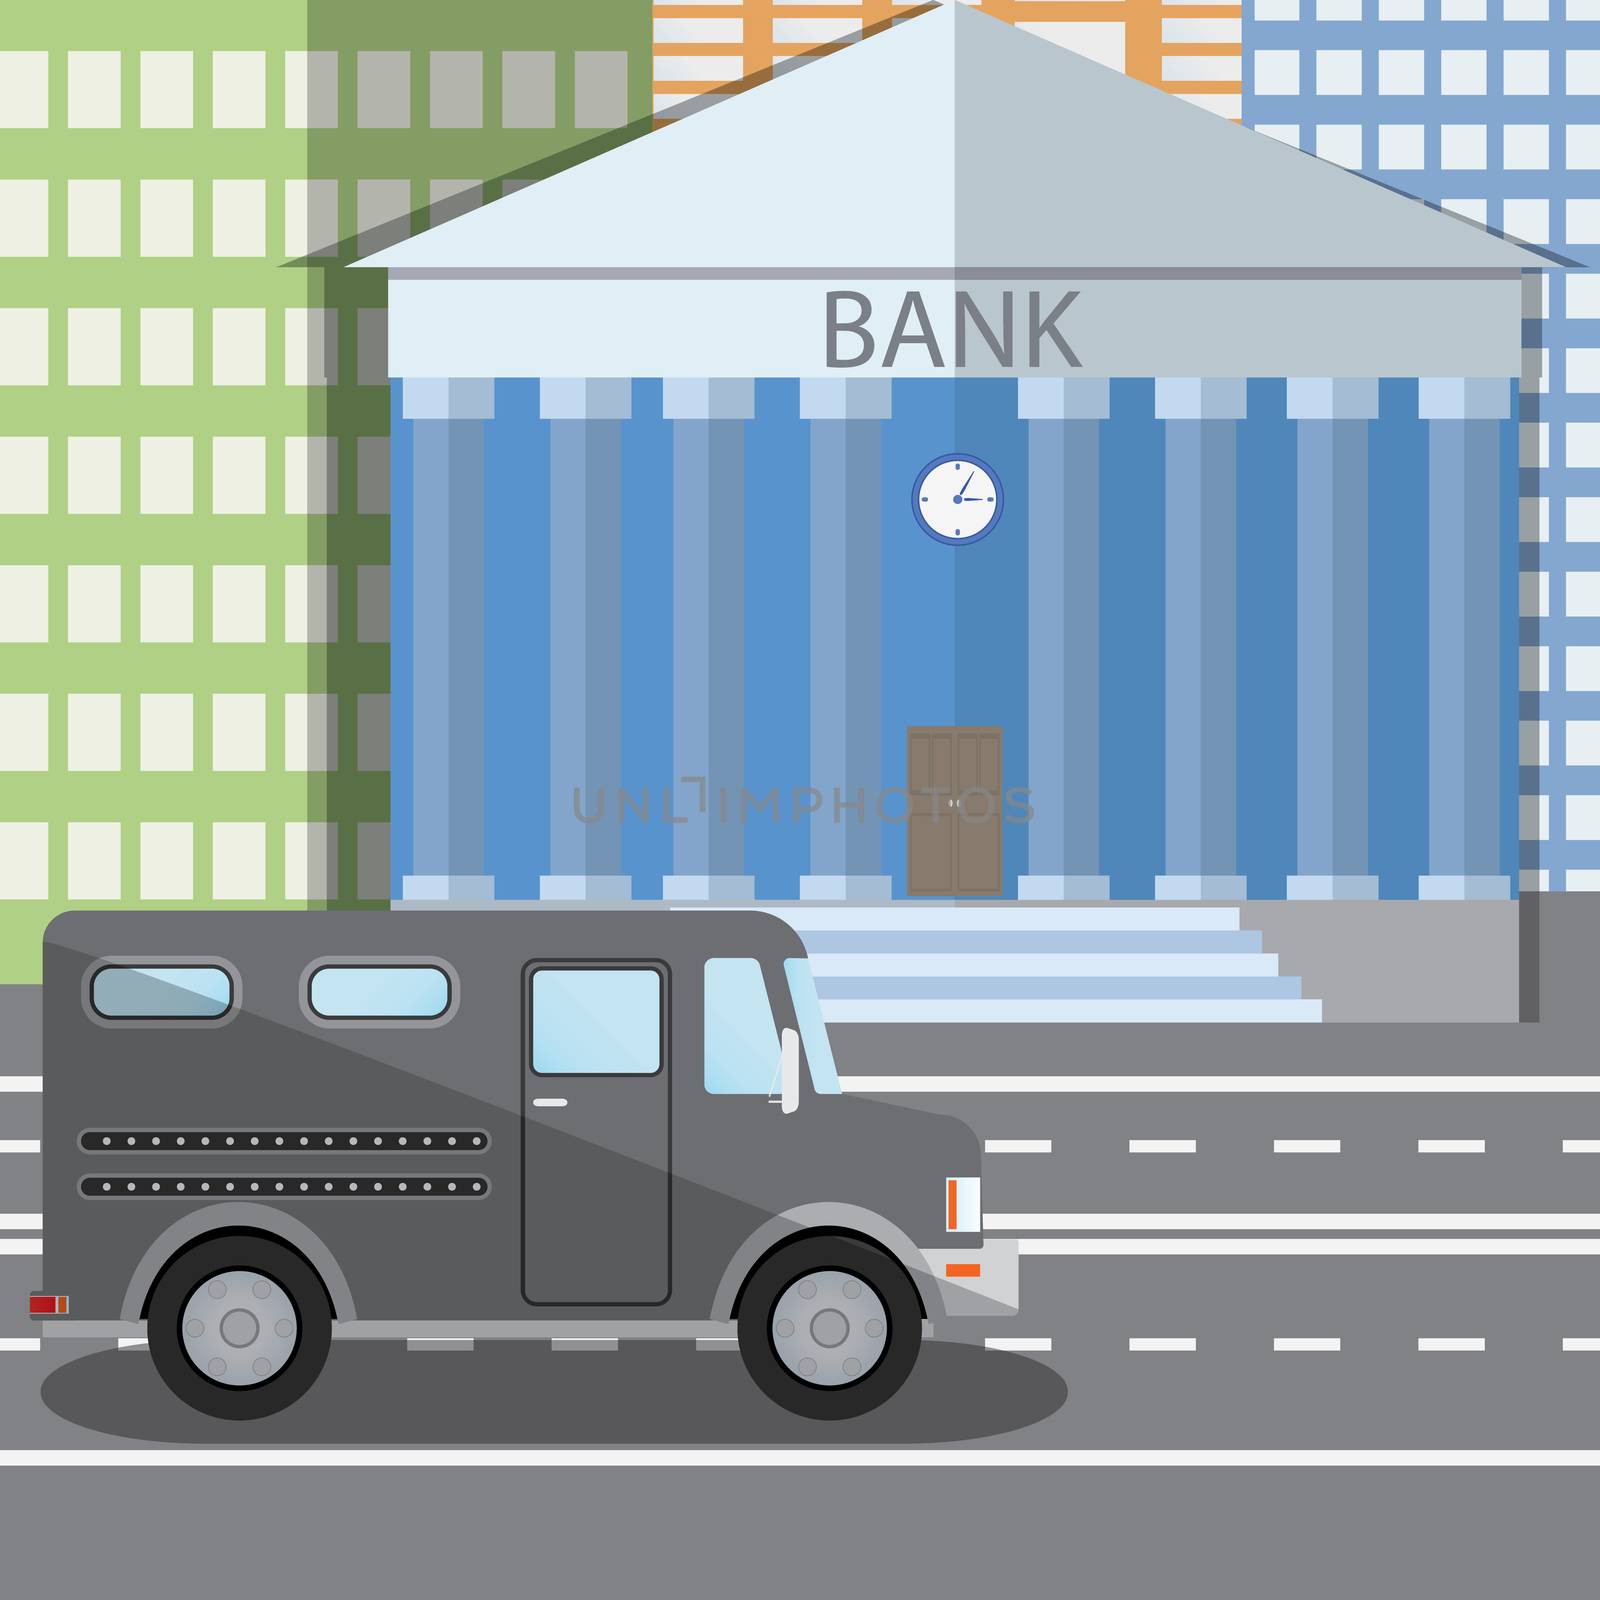 Flat design vector illustration of bank building and parked bulletproof armored truck in flat design style, vector illustration by Lemon_workshop